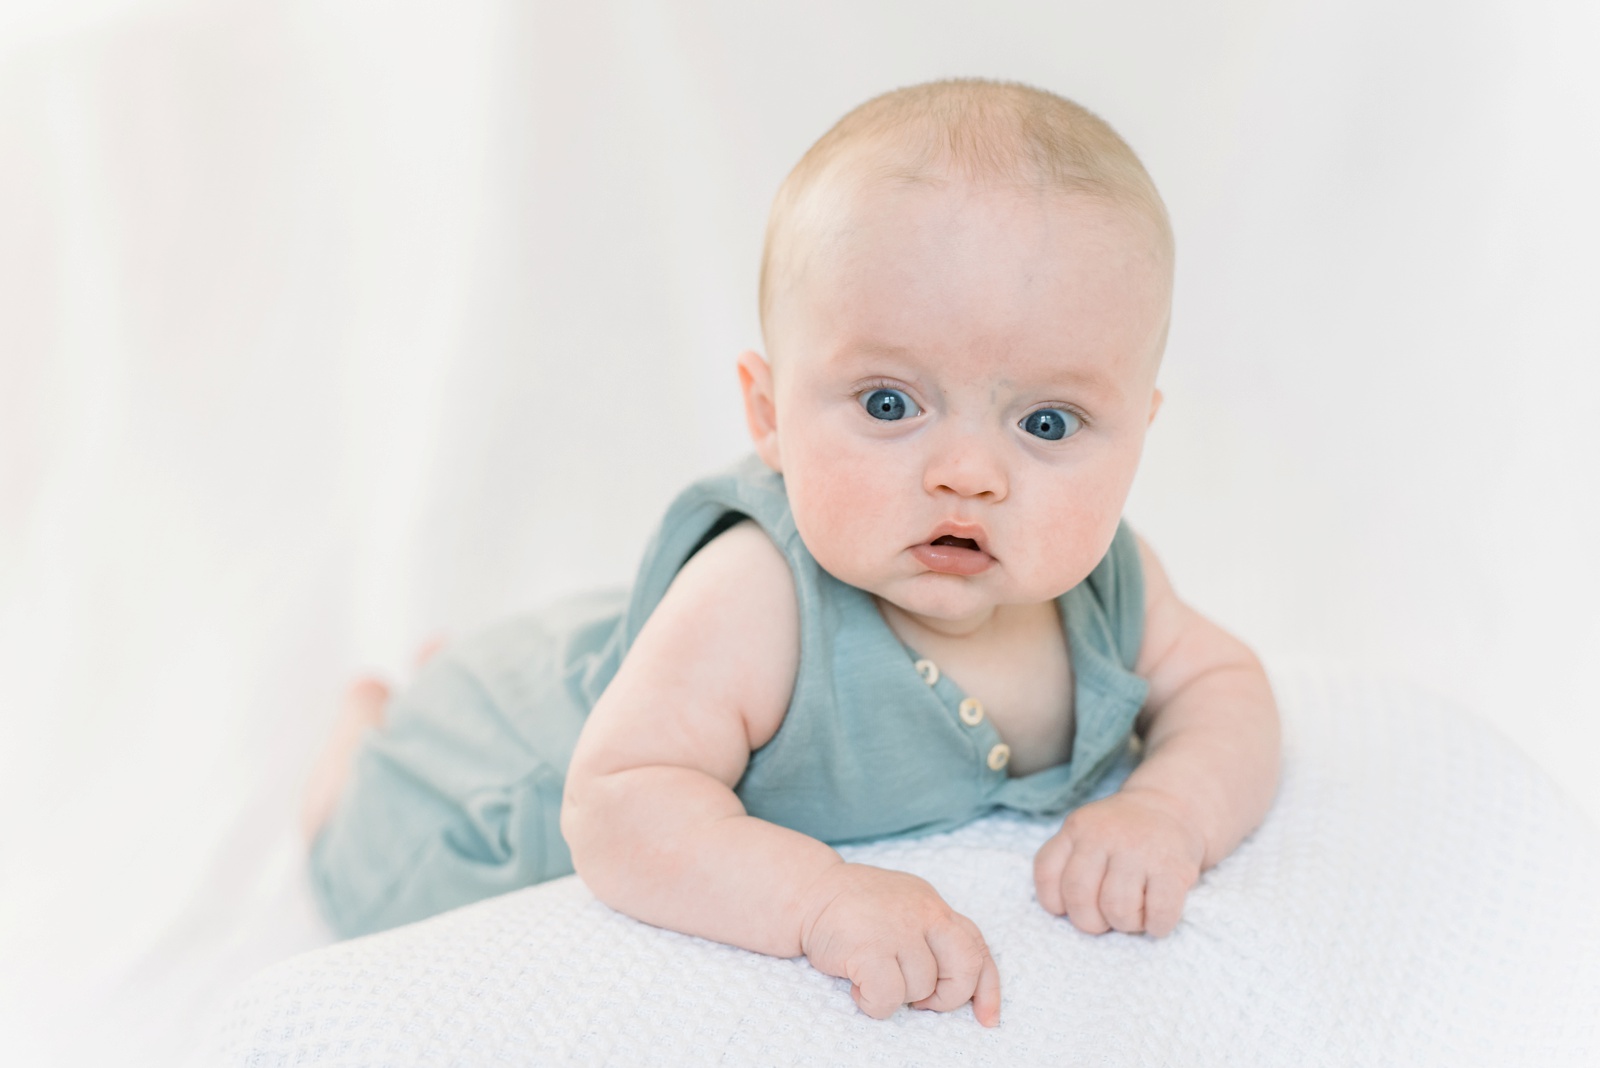 sweet-baby-james-allen-4-and-5-months-old-photo_7660.jpg